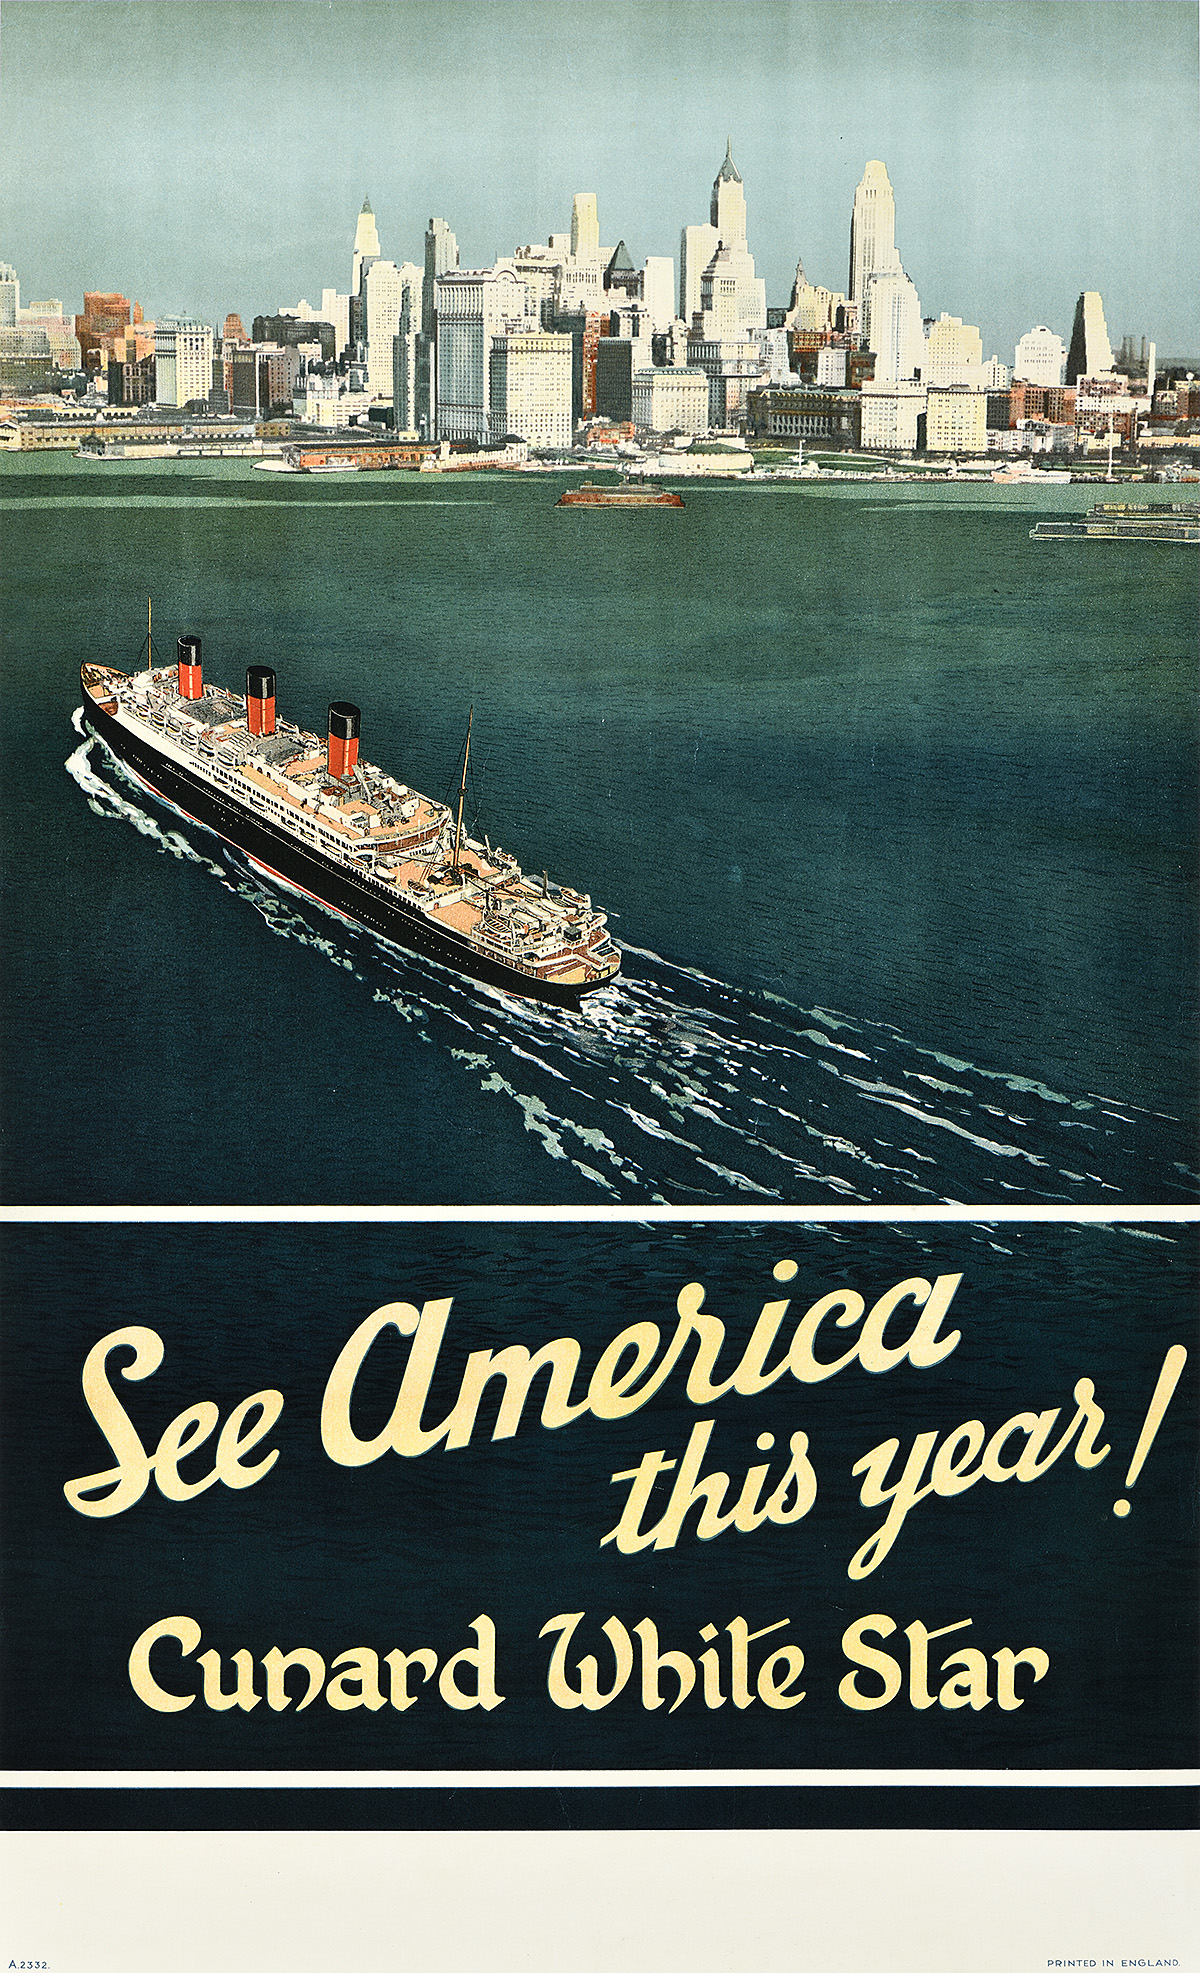 A poster of a bird's-eye view of a long ship with 3 funnels moving towards a New York City skyline.